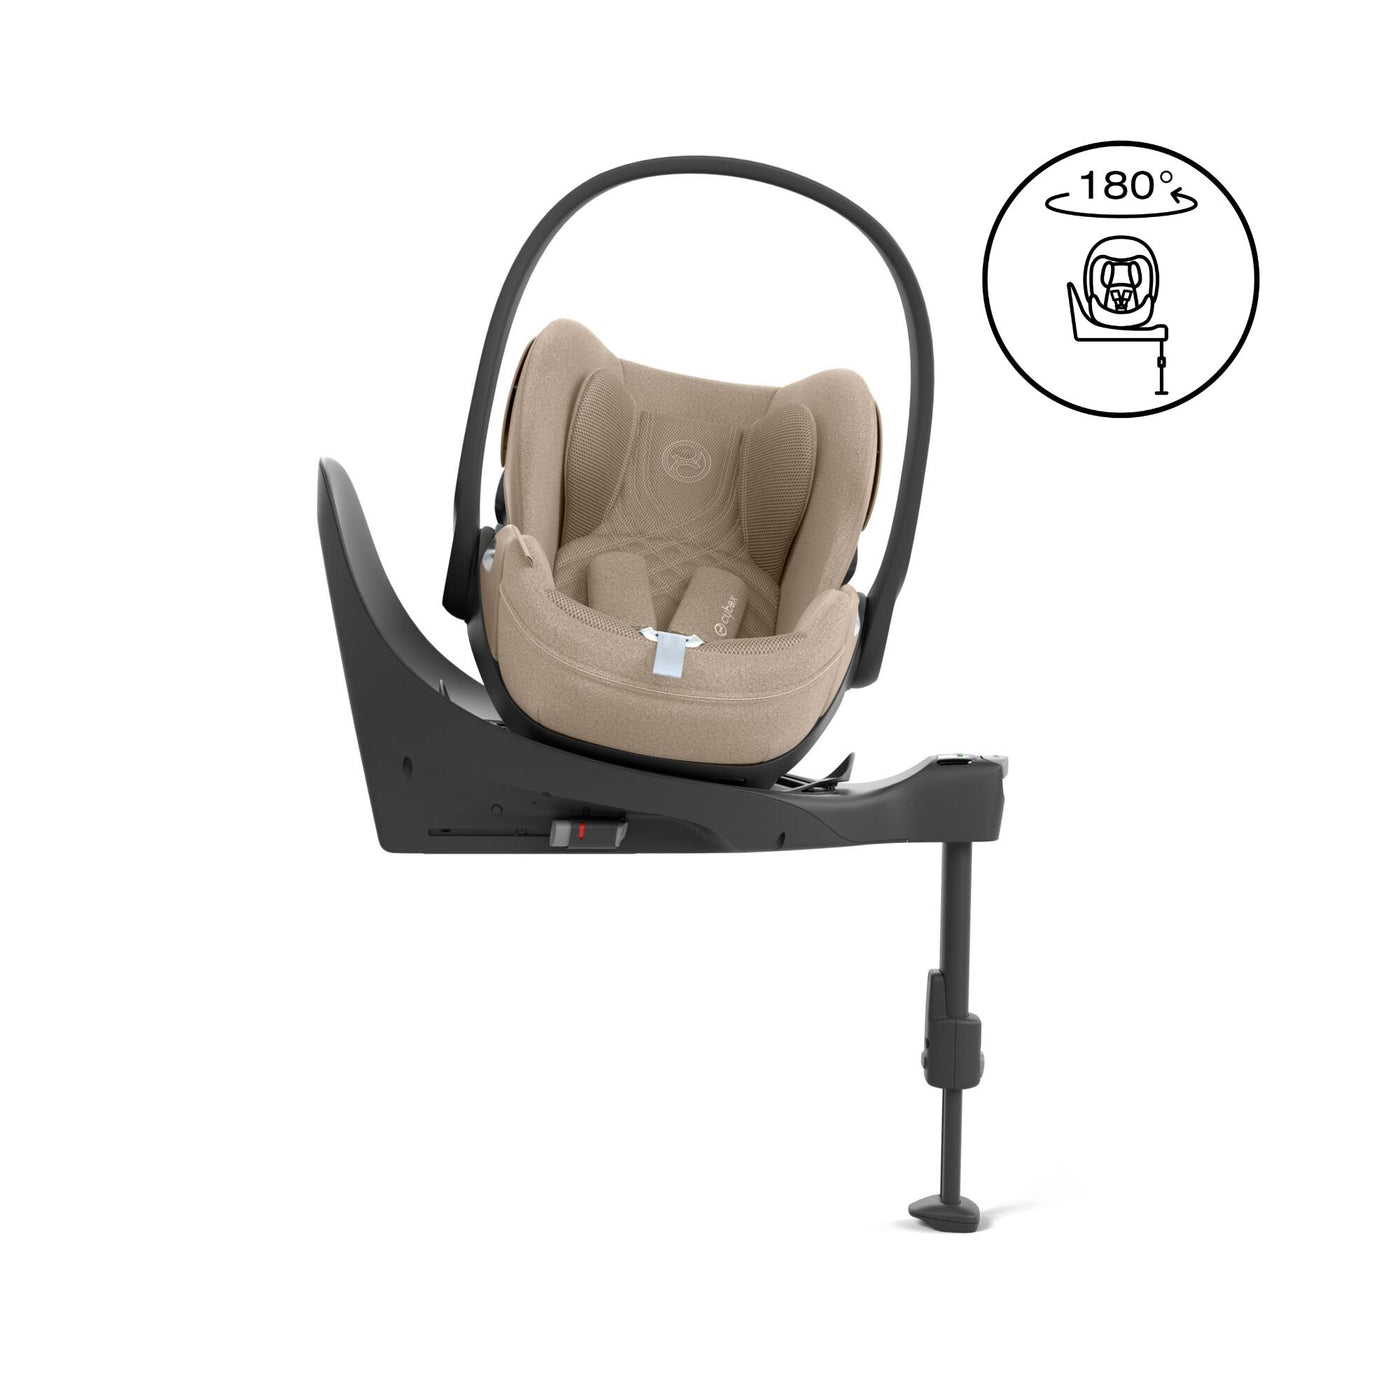 Cybex Cloud T i-Size car seat in Cozy beige with the Base T 180 degrees rotations car seat base 